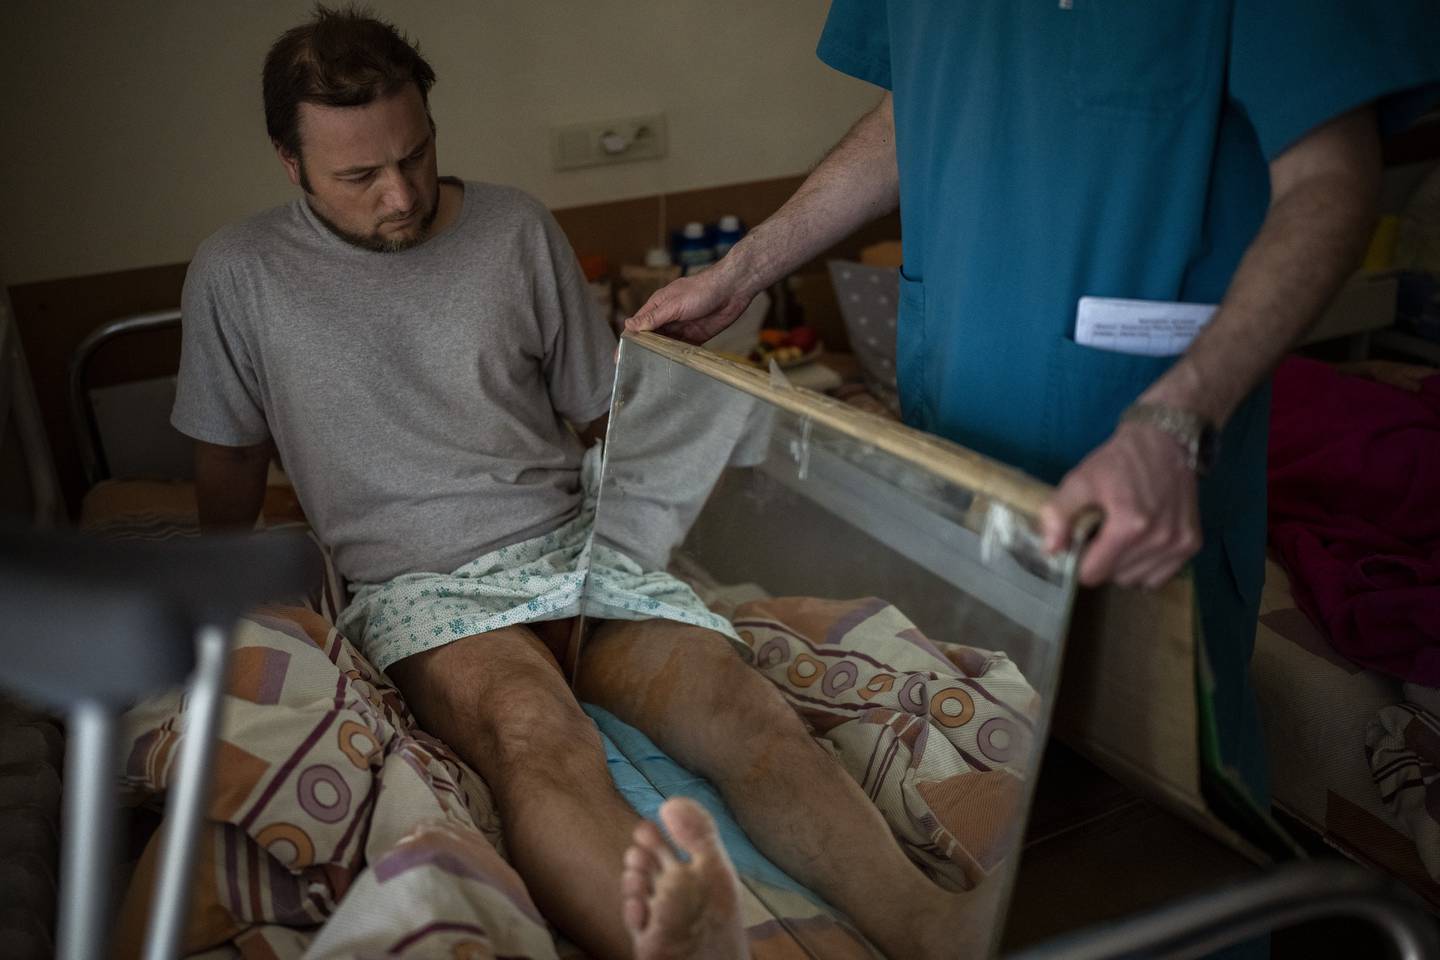 Sasha Horokhivskyi, 38, performs mirror therapy to mitigate phantom pains at a public hospital in Kyiv, Ukraine, Thursday, April 28, 2022. Sasha lost his leg above the knee on March 22 after being shot in the calf by a territorial defense member who mistook him for a spy after he stopped to take photos of bombed buildings near his home.(AP Photo/Emilio Morenatti)